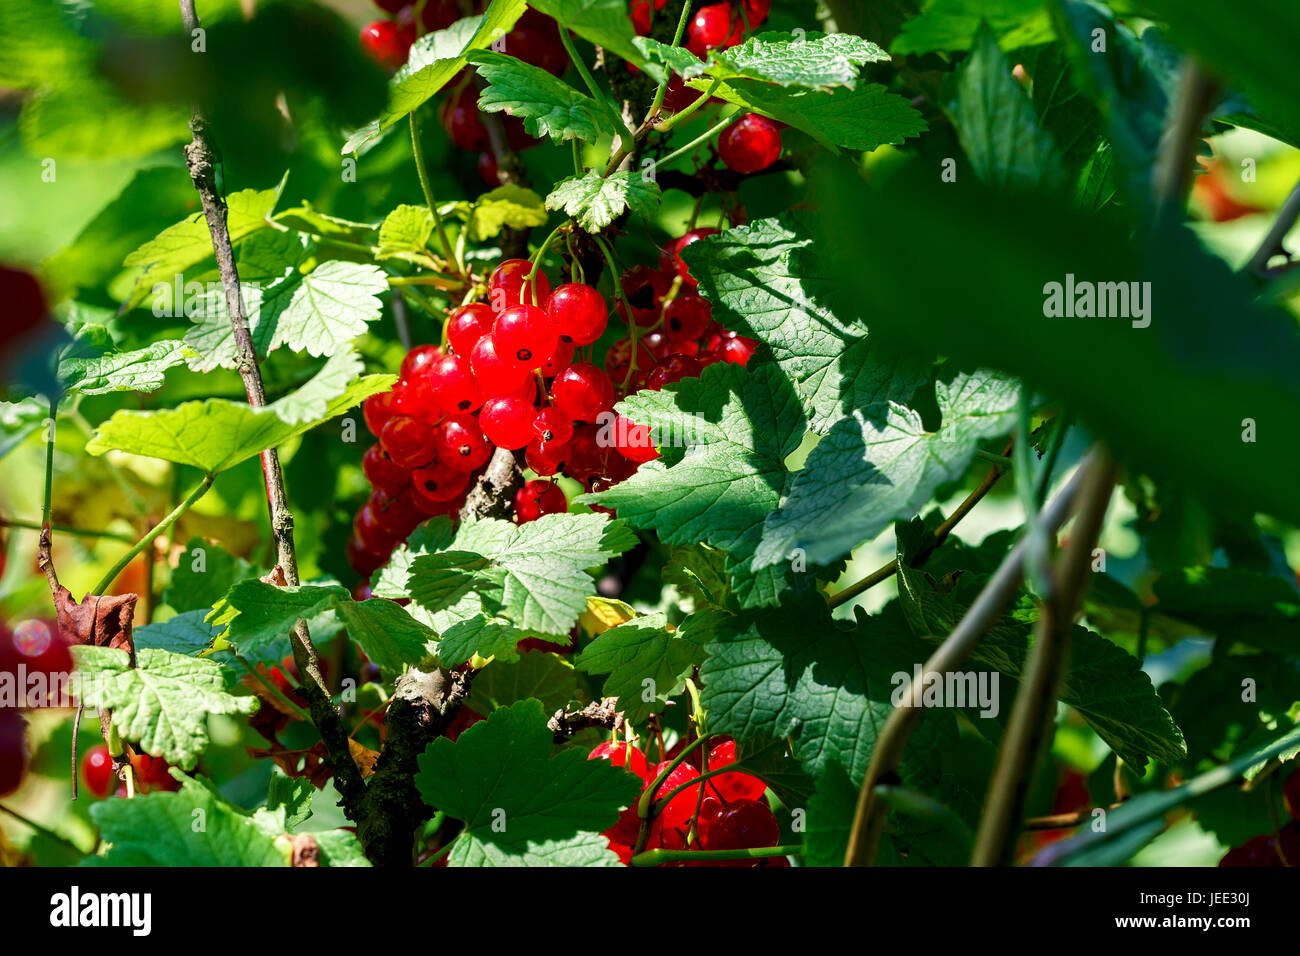 Fruits of red currants on the bushes in the garden. Stock Photo